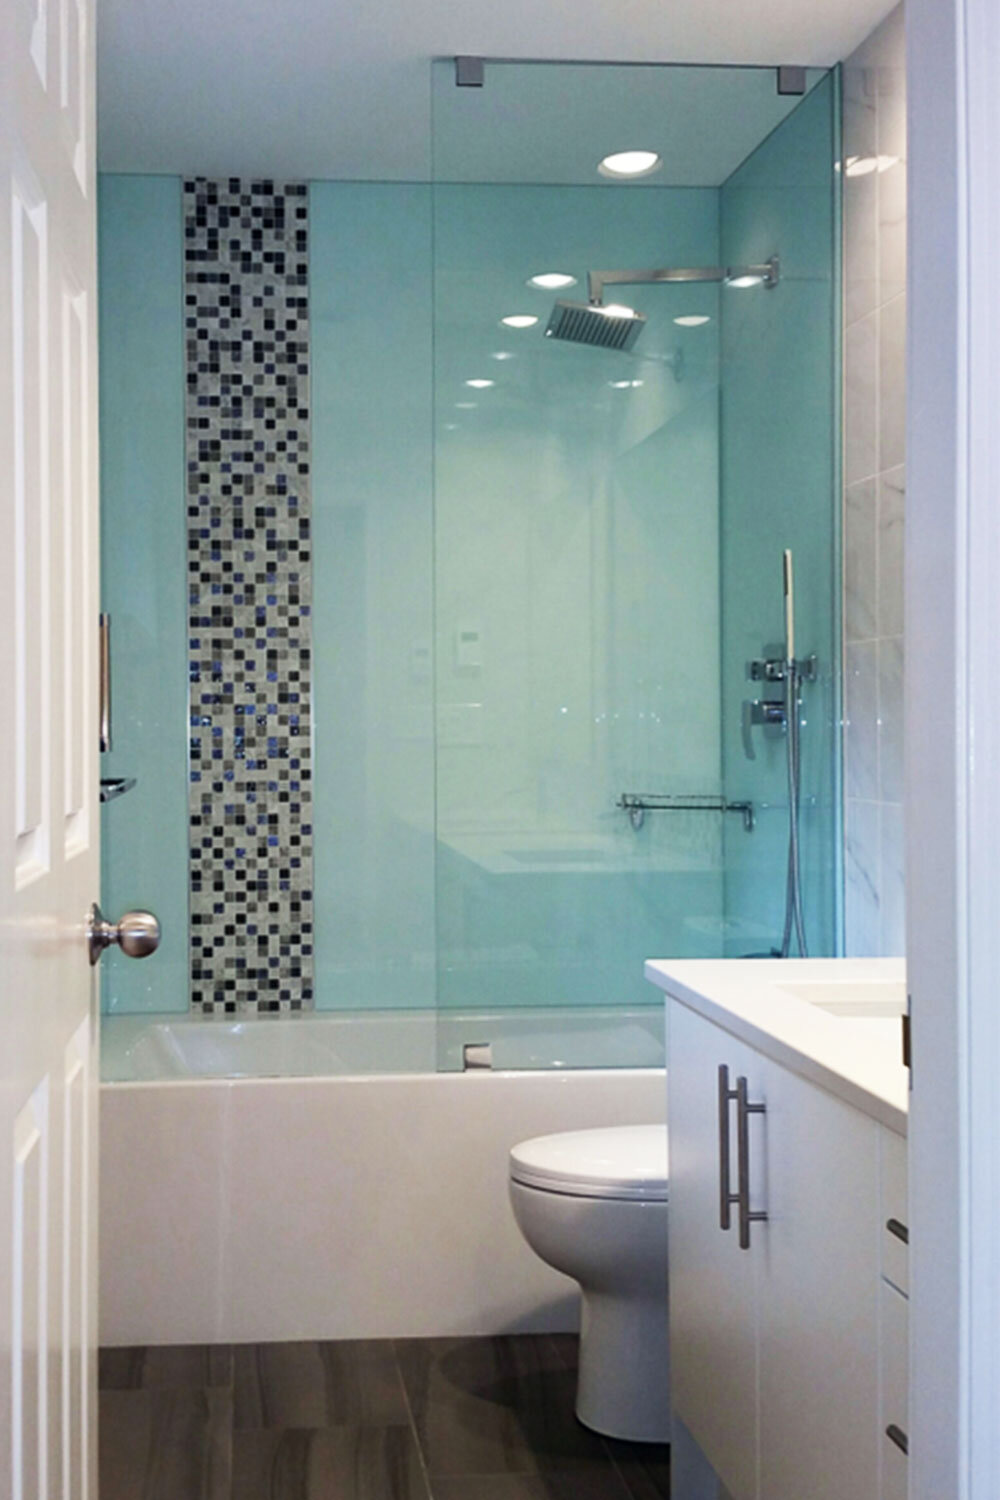 icd-high-performance-coatings-and-chemistries-construction-project-image-backpainted-glass-shower-surround-wall-cladding-opaci-coat-300.jpg